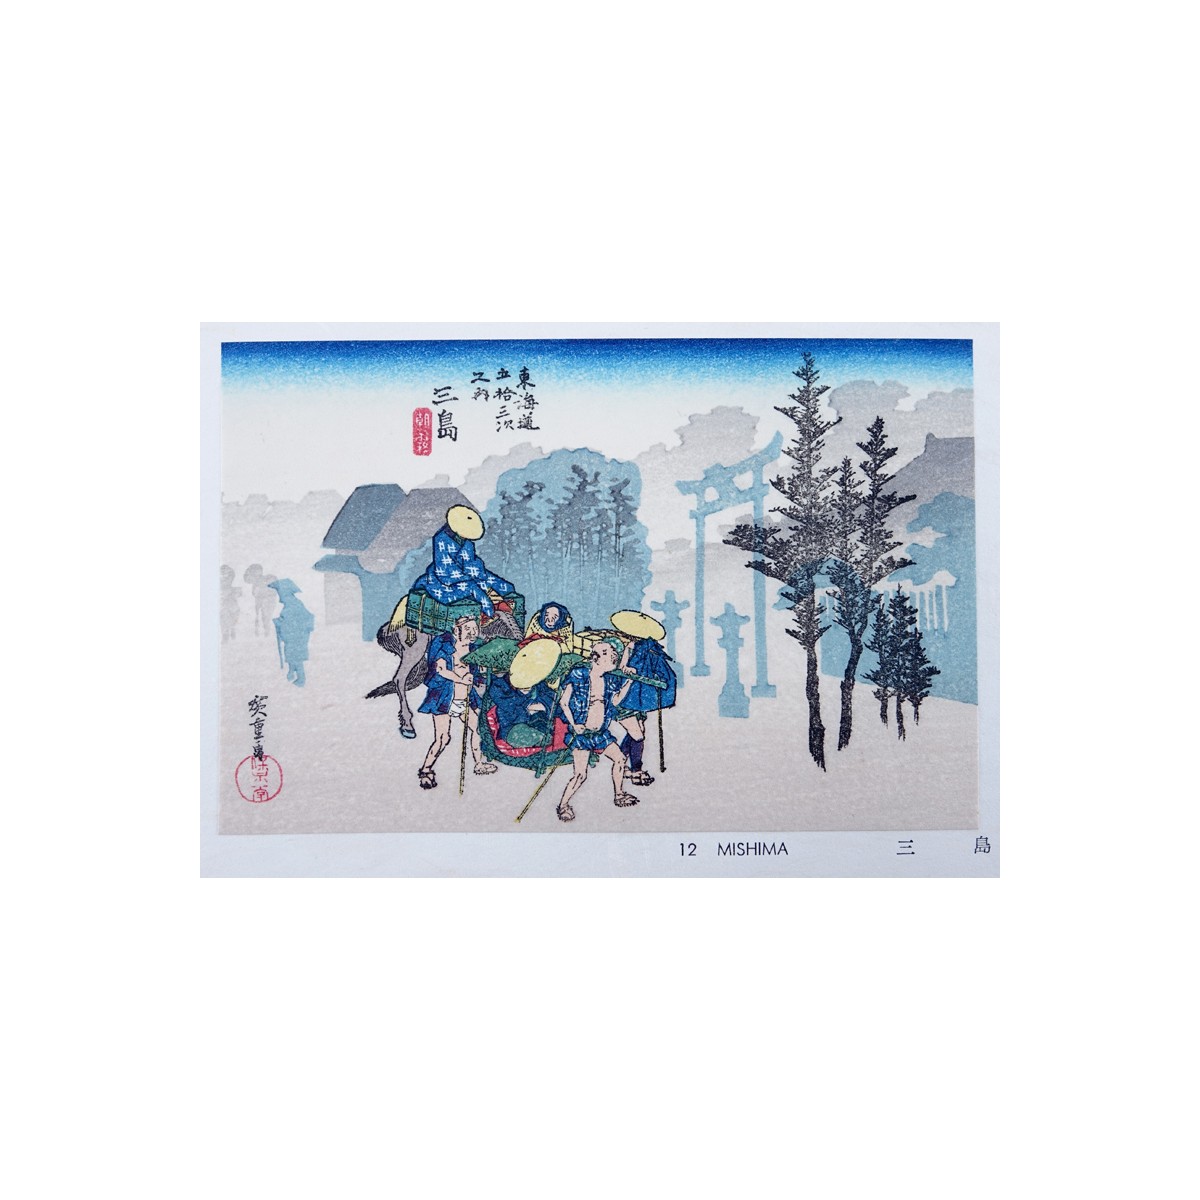 Modern Reproduction "The Tokaido Fifty Three Stations By Hiroshige" Good condition. Measures 4-3/4"